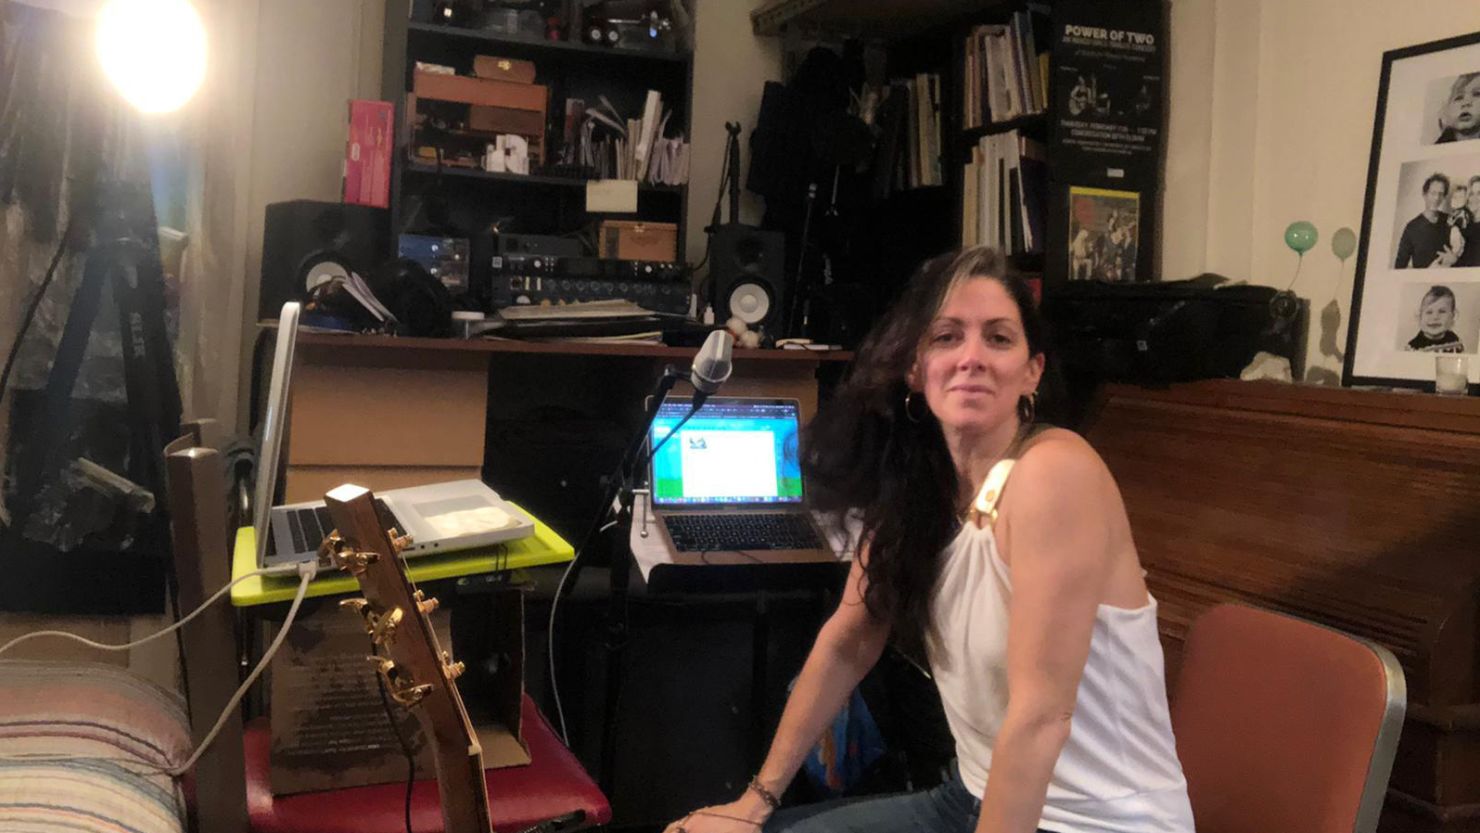 Naomi Less, a member of Lab/Shul's ritual team, has been helping lead the organization's online Shabbat services since it's become impossible to meet in person.